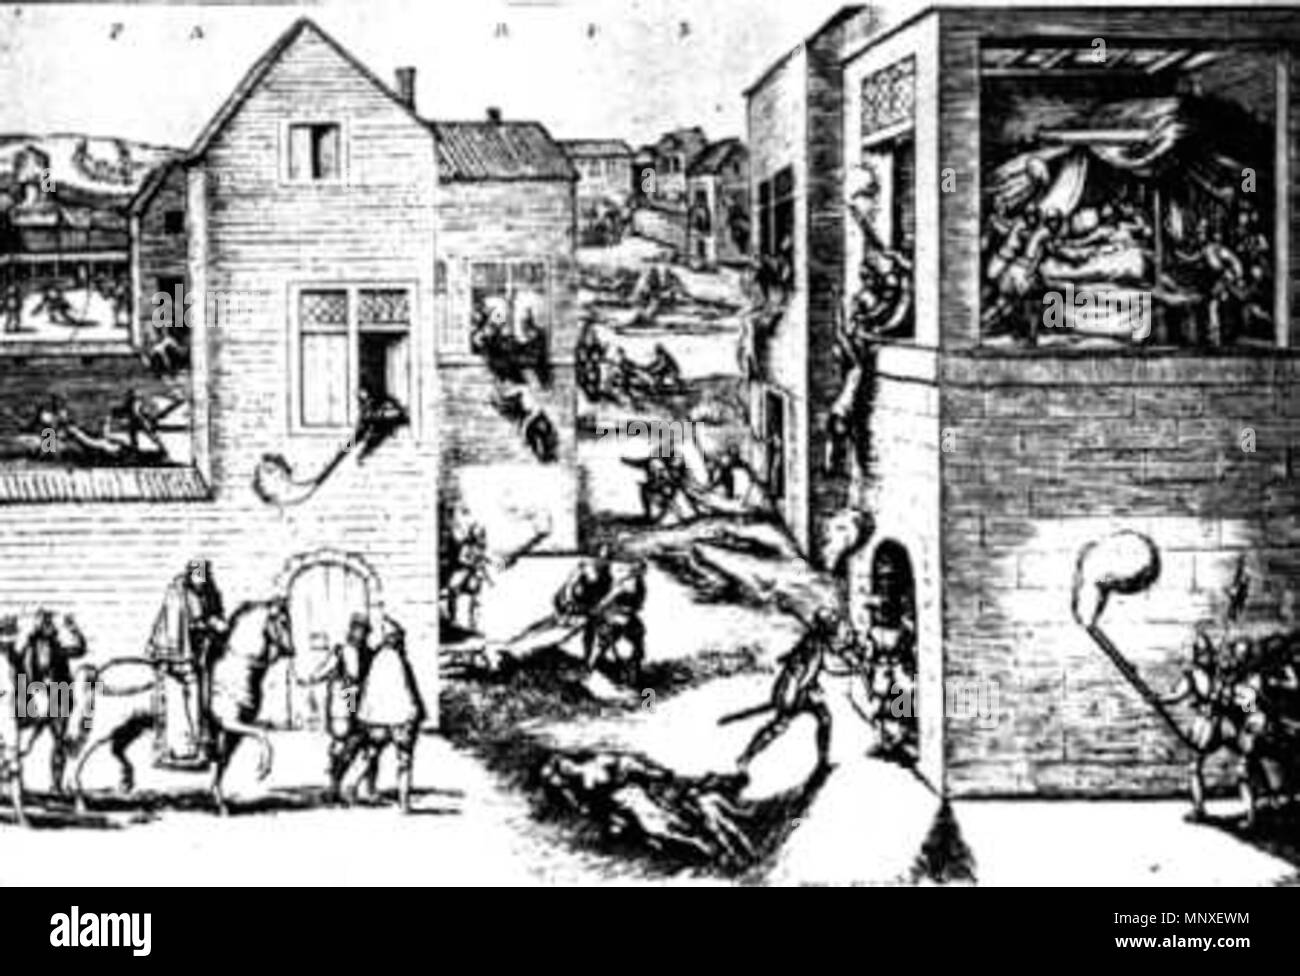 . St. Bartholomew's Day massacre; the attempted assassination of Coligny on the left, the later massacre to the right . circa 1572.   Frans Hogenberg  (before 1540–1590)    Alternative names Franz Hogenberg, Frans Hogenbergh, Frans Hogenberch  Description Flemish engraver and cartographer  Date of birth/death before 1540 1590  Location of birth/death Mechelen Cologne  Work period 1568-1588  Work location Antwerp (1568), London (1568), Cologne (1570-1585), Hamburg (1585-1588), Denmark (1588)  Authority control  : Q959748 VIAF: 100197099 ISNI: 0000 0001 1839 1431 ULAN: 500000956 LCCN: n50043890  Stock Photo